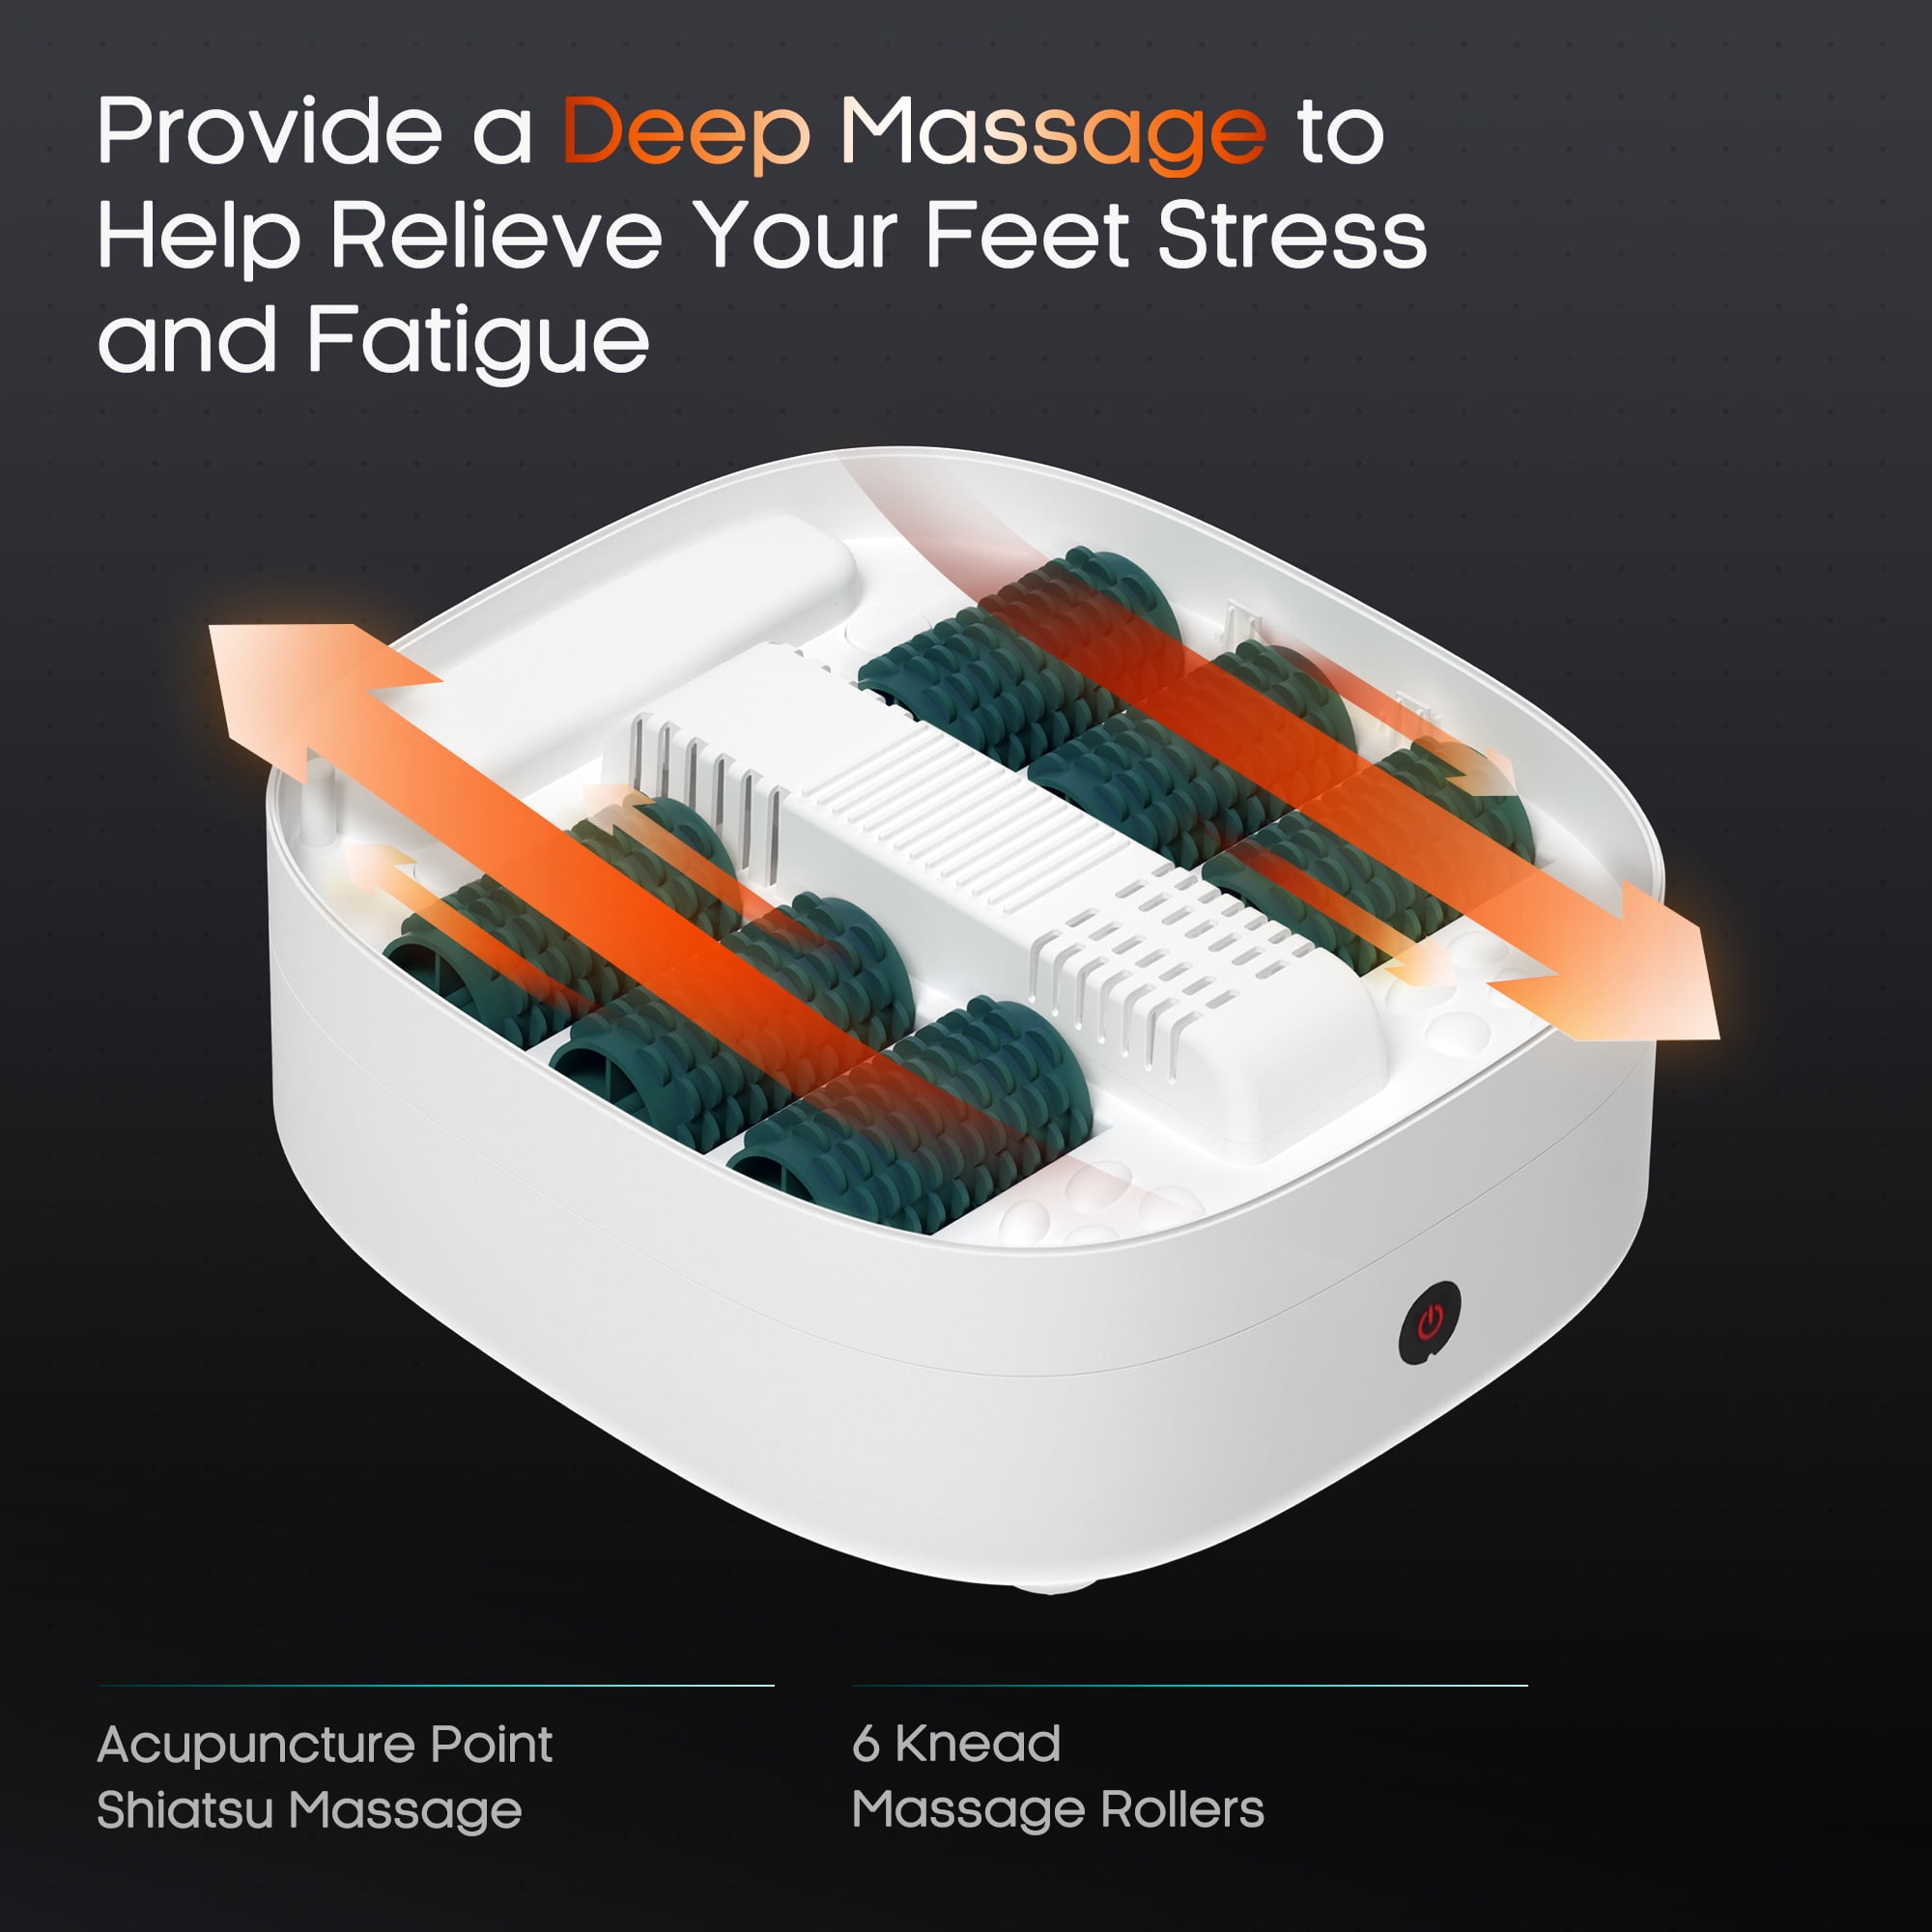 Foot Spa Bath Massager With Heat Maxkare ⋆ Bold-Products USA